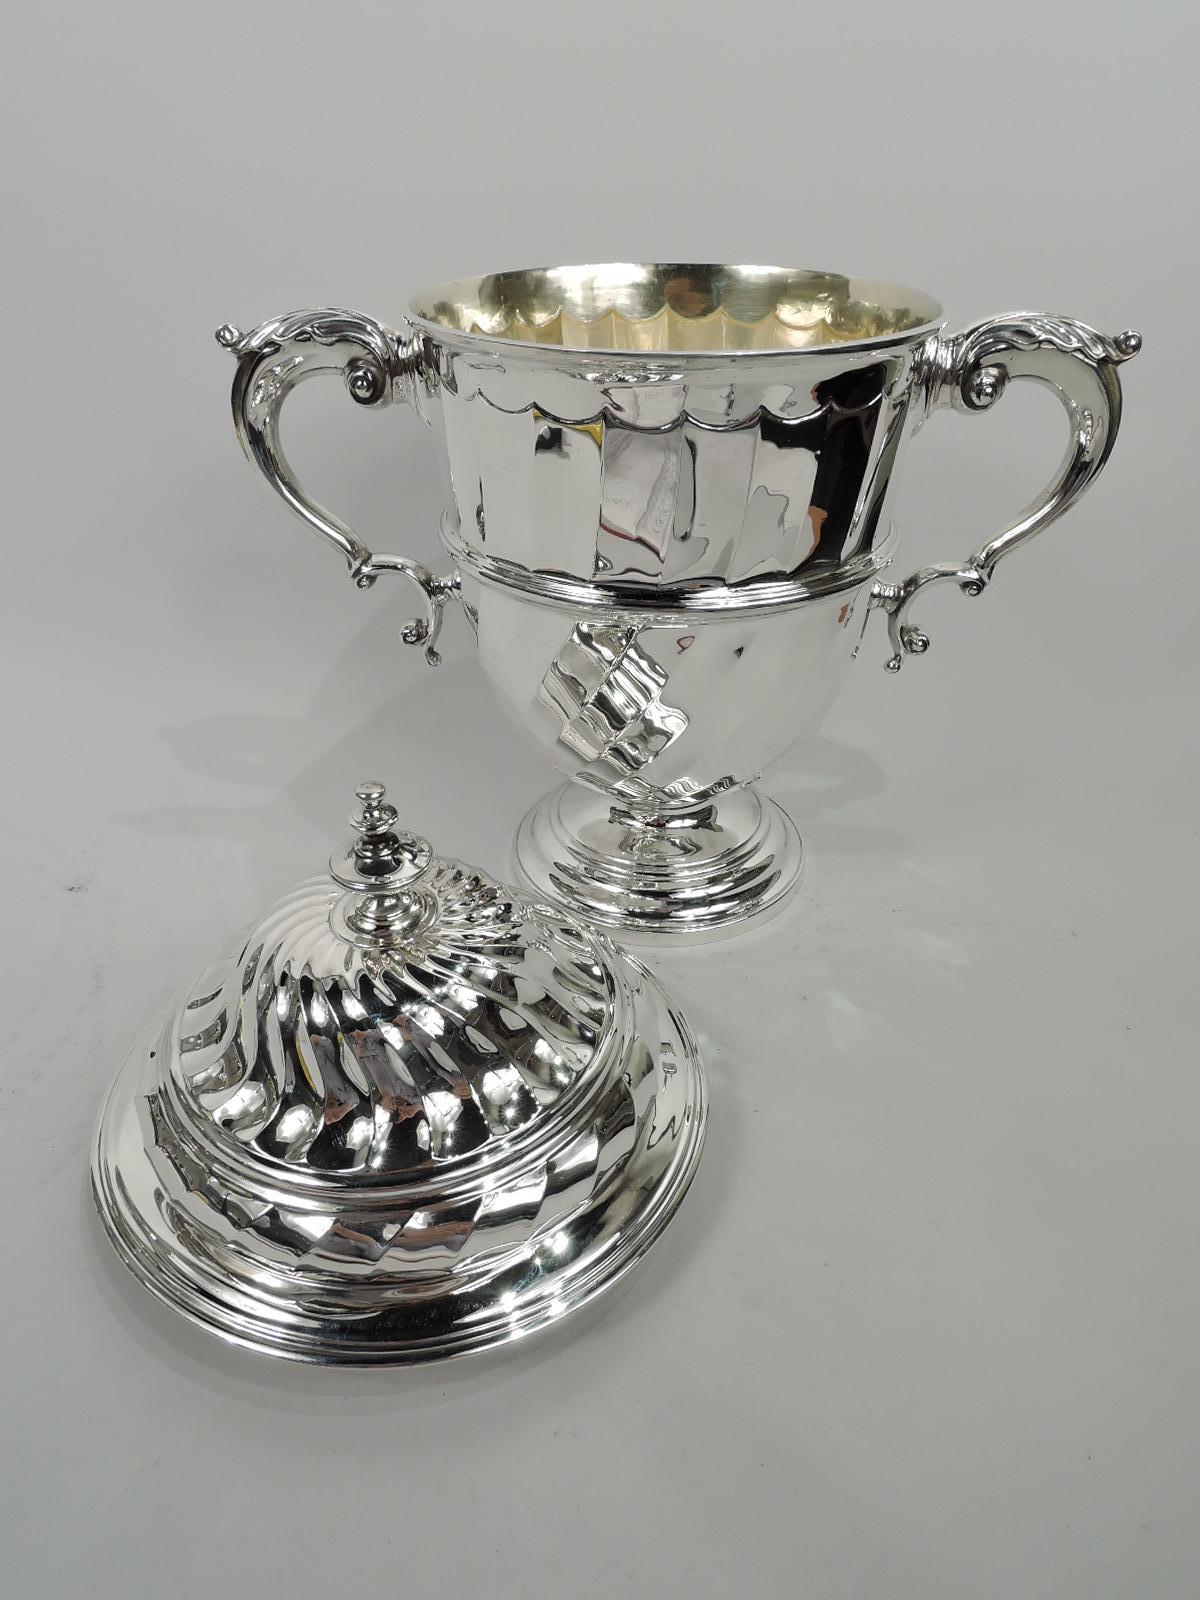 Elizabeth II sterling silver covered urn. Made by Solomon Joel Phillips in London 1959. Traditional Neoclassical girdled urn on stepped and domed foot with leaf-capped s-scroll side handles. Cover double-domed with vasiform finial. Urn has twisted